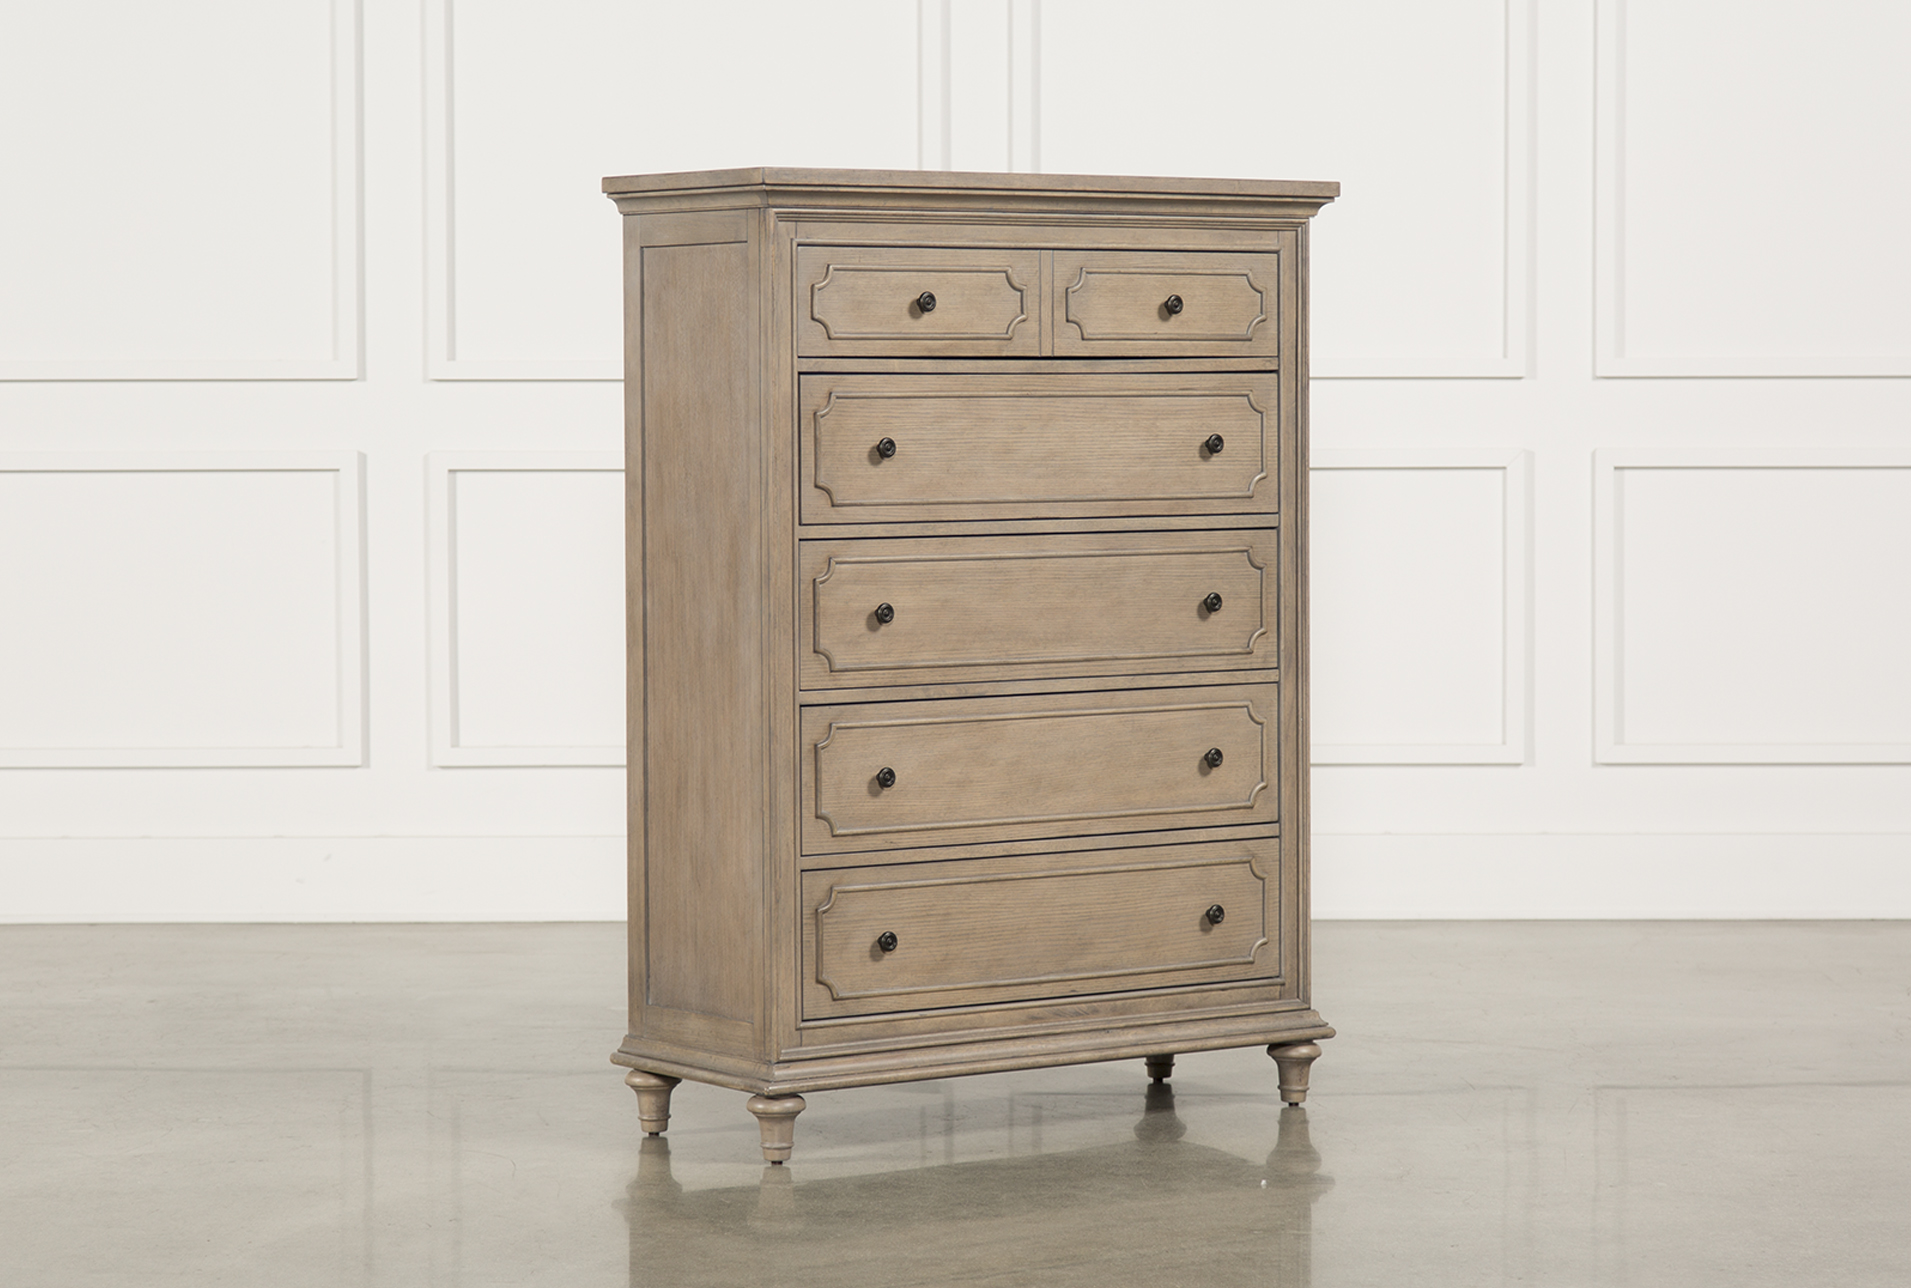 Scarlett dresser (Qty: 1) has been successfully added to your UWGDENQ